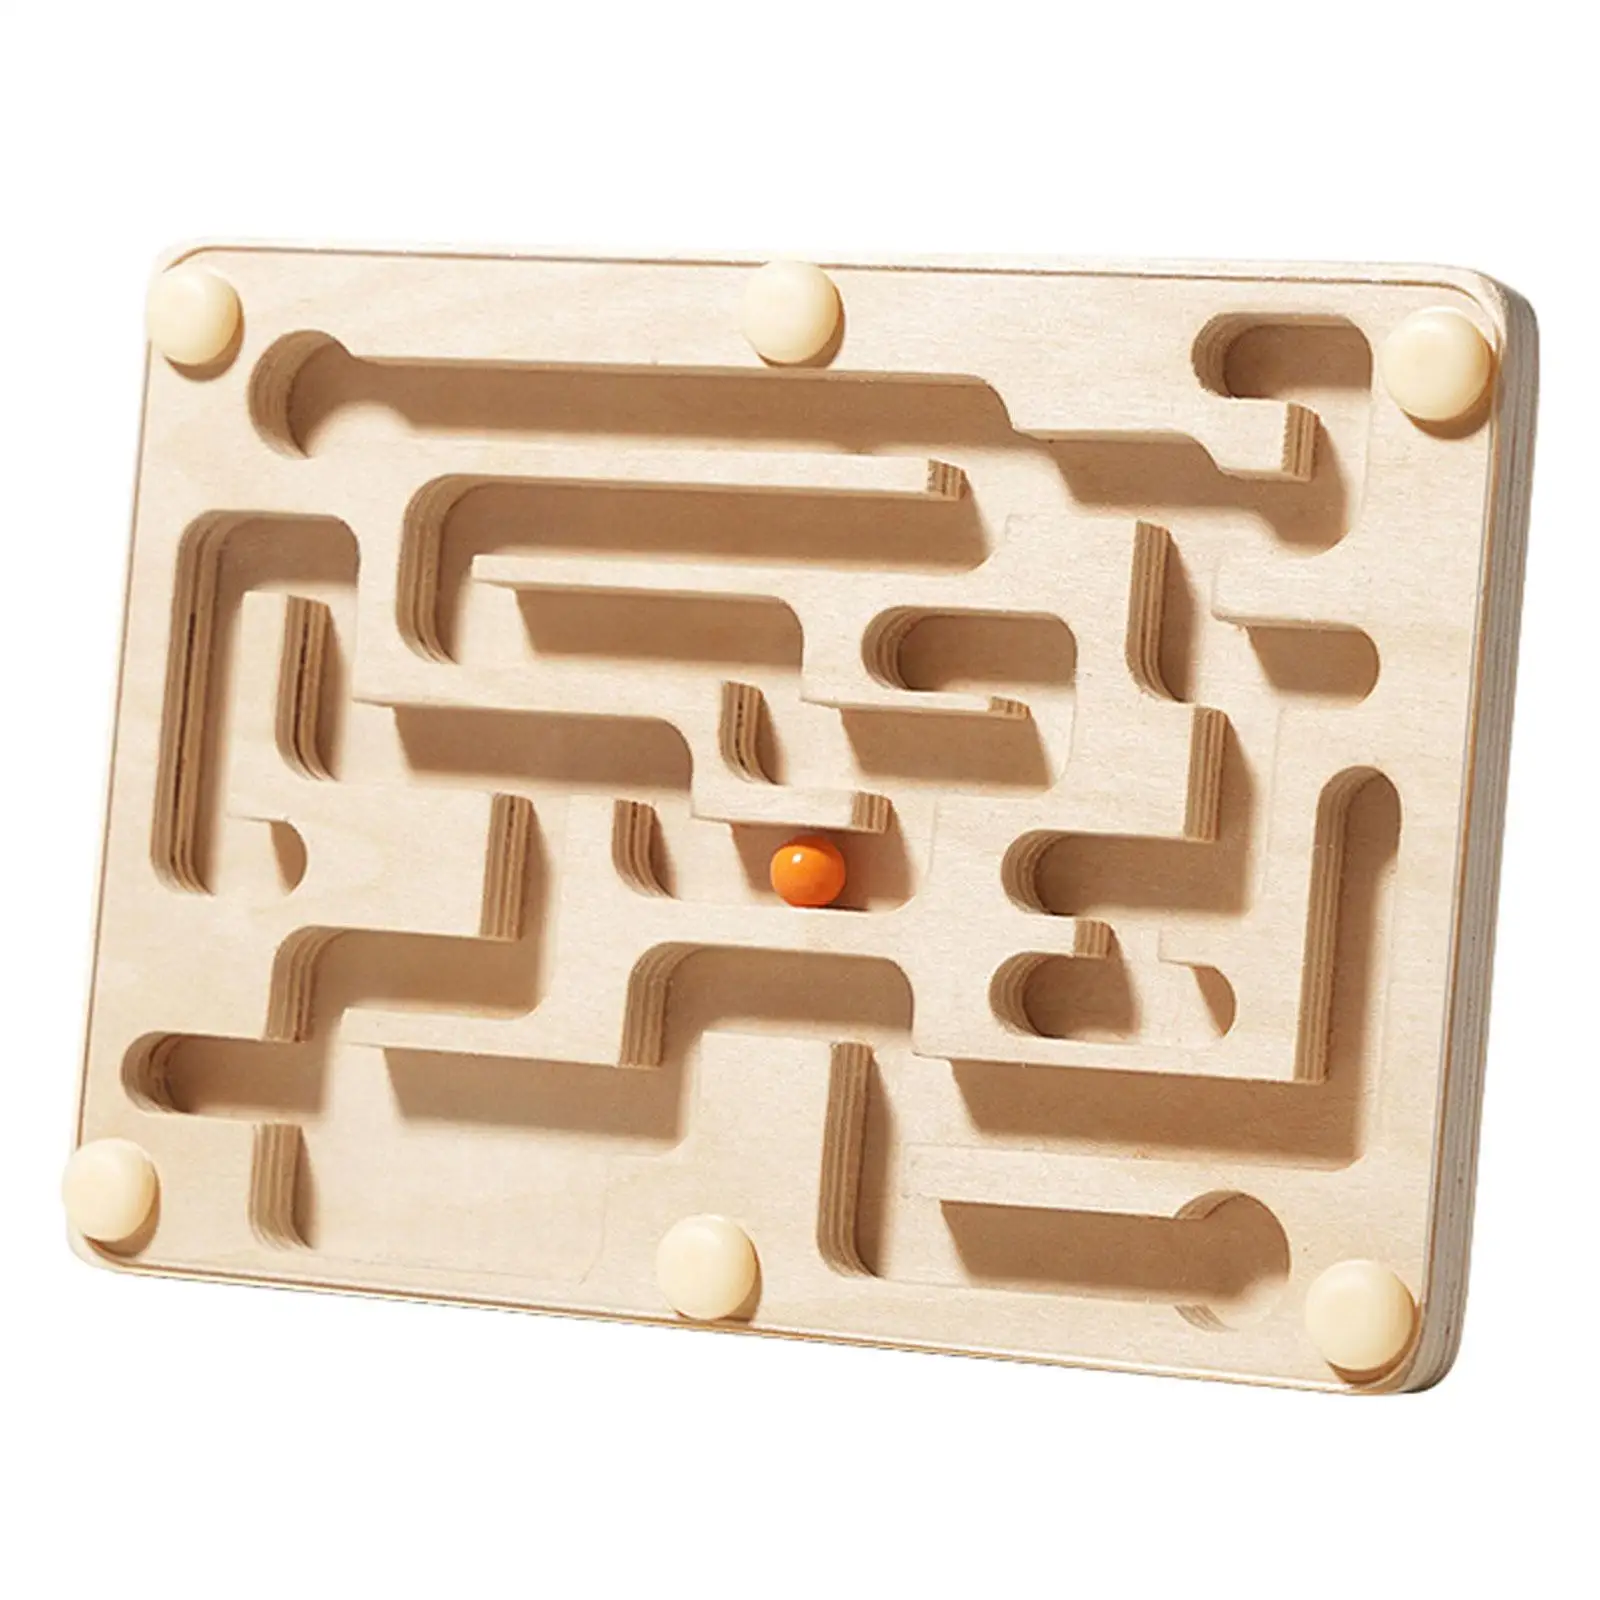 

Marble Maze Puzzle Logical Game Montessori Wooden Toy Wooden Labyrinth Board Game for Children Adults Boys and Girls Kids Teens